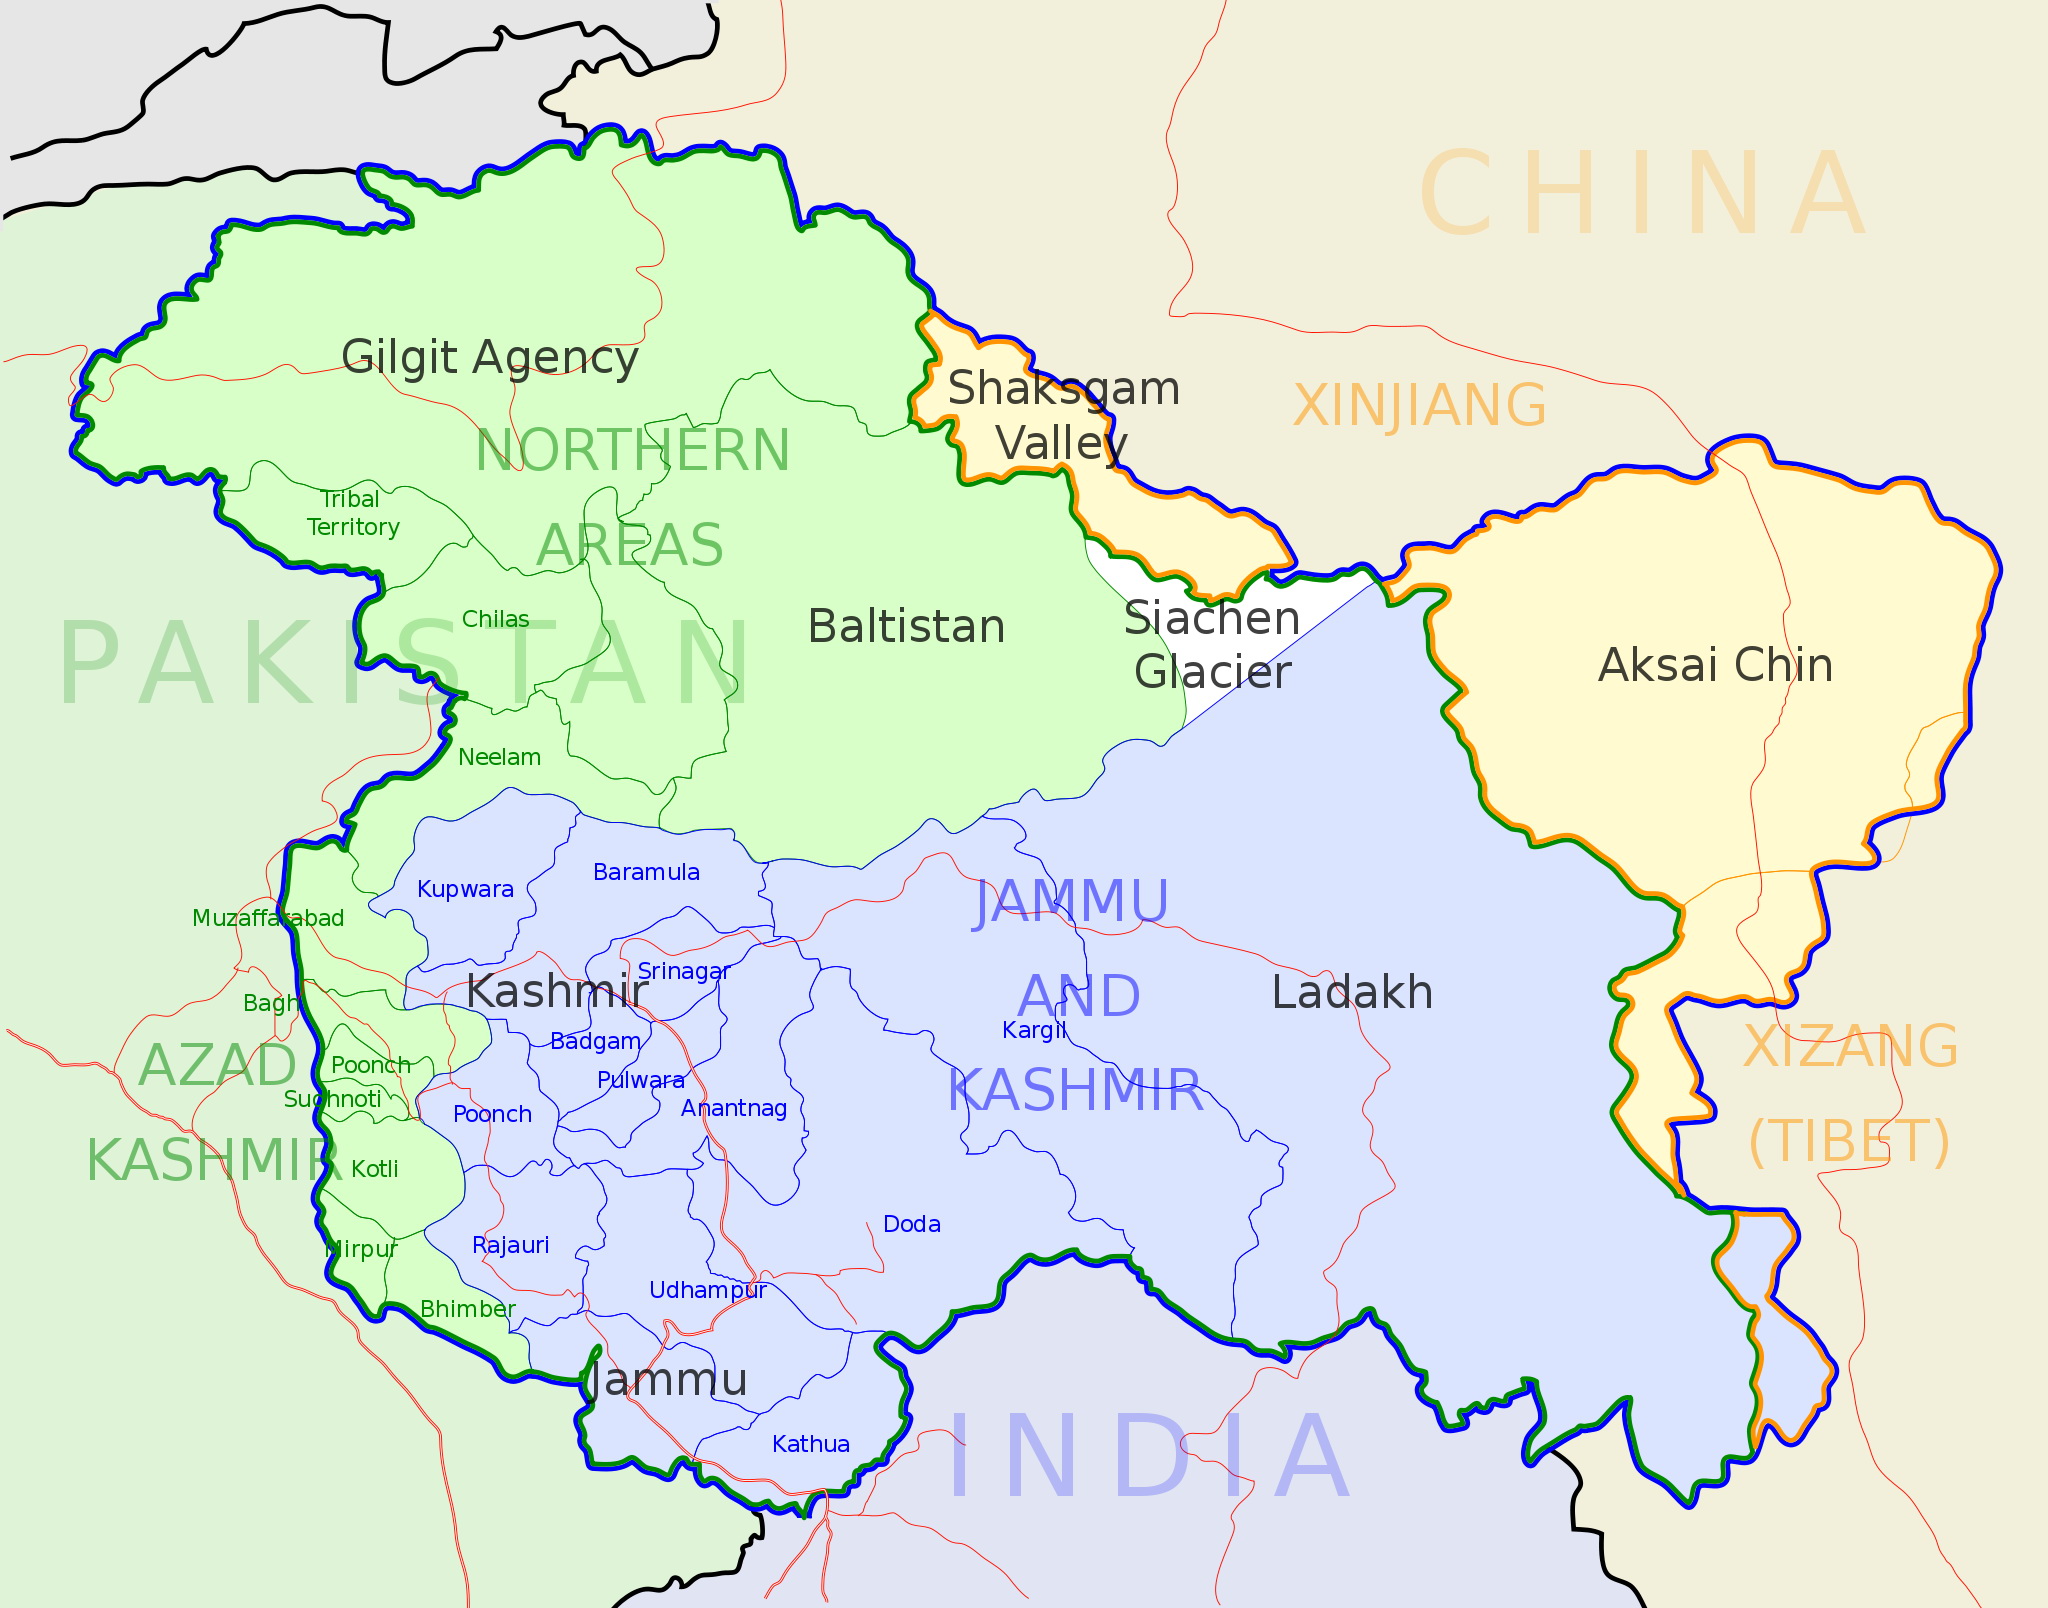 A map drawing of the Kashmir areas and districts